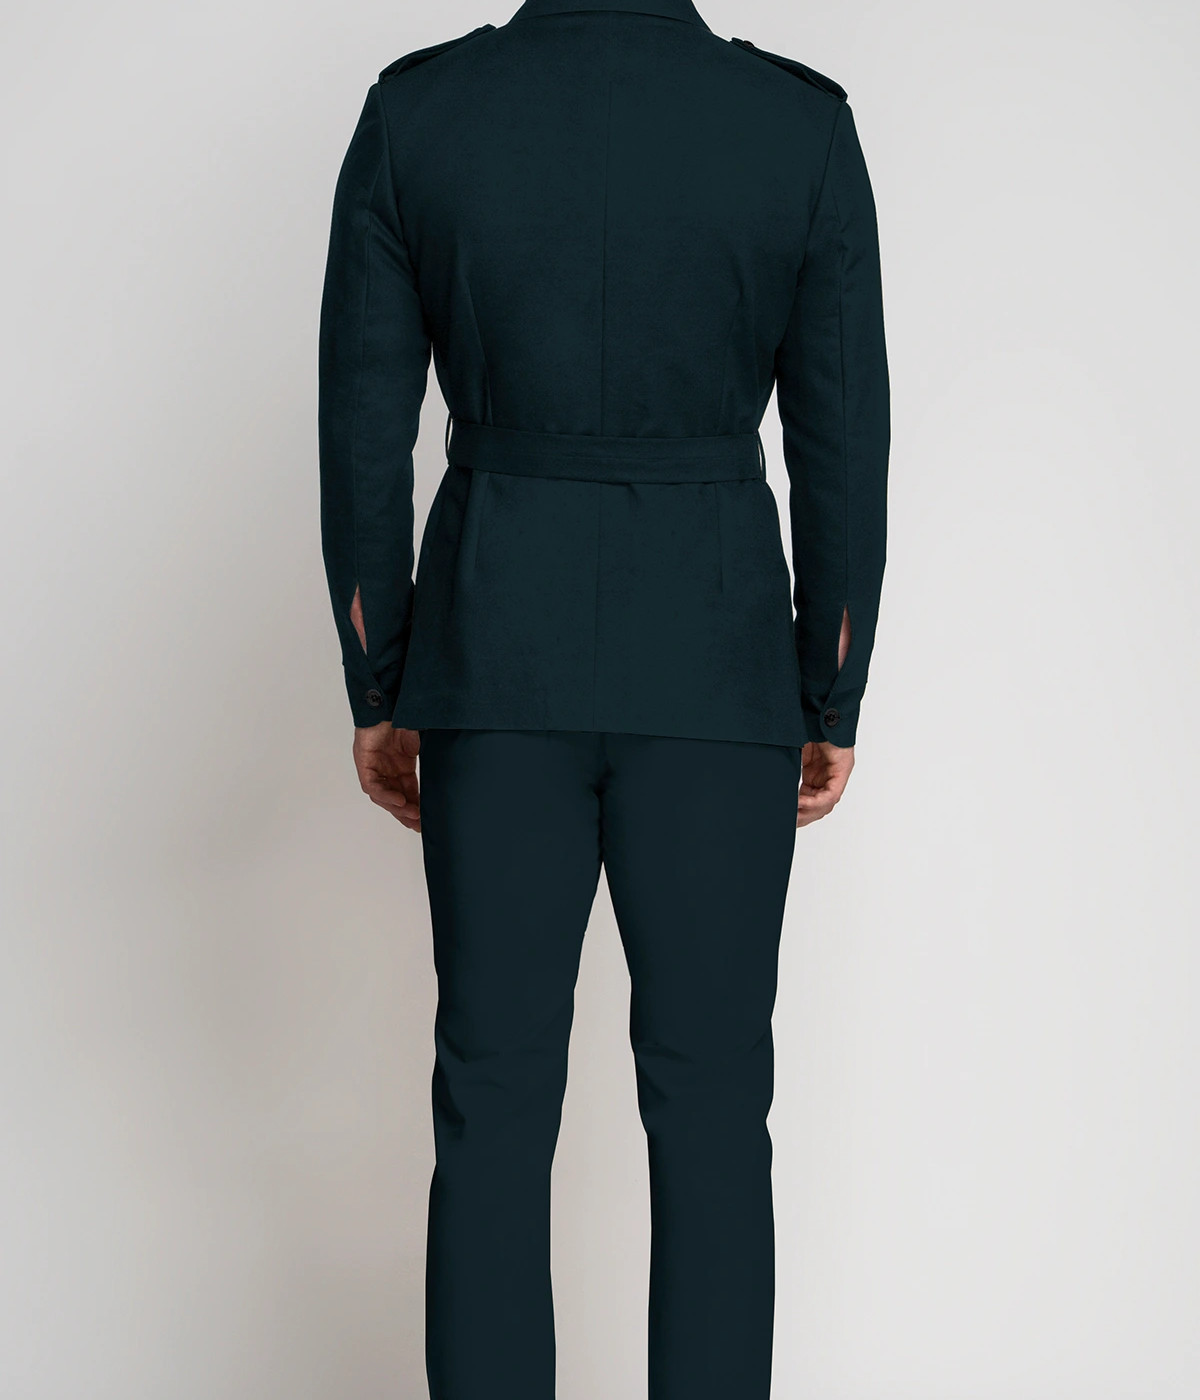 Aspen Teal Green Military Suit- view-1